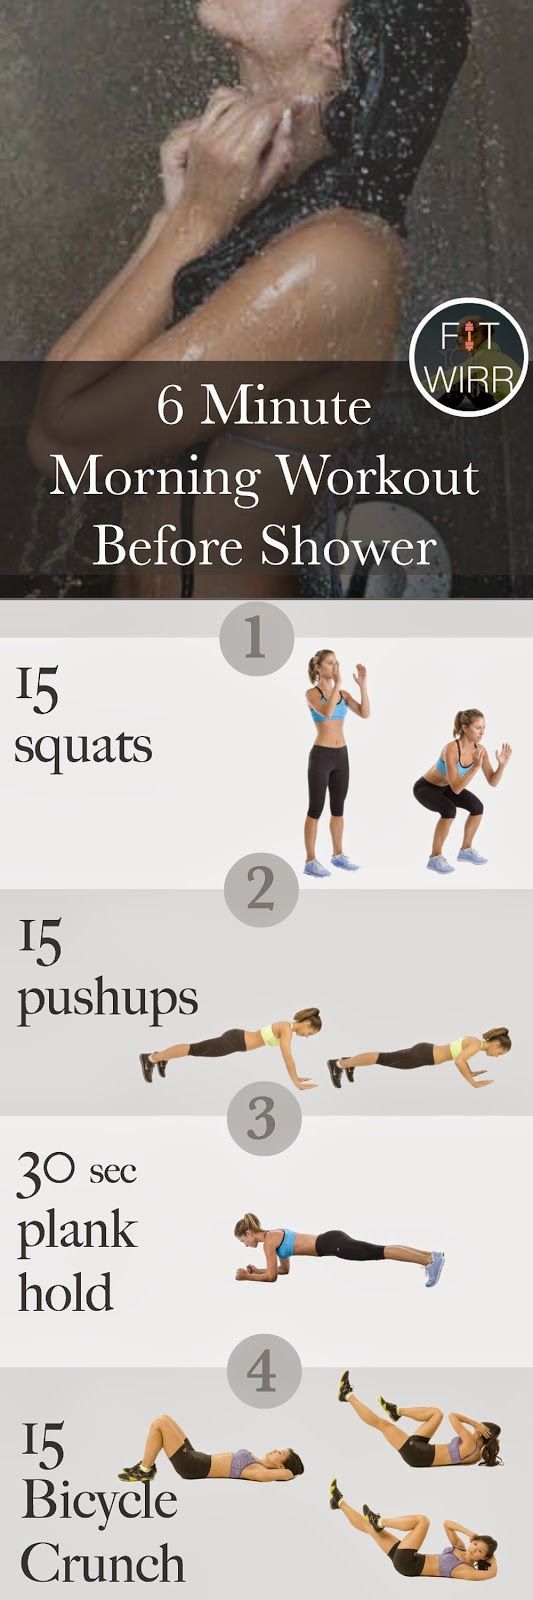 Wedding - 6 Minute Morning Workout Before Shower